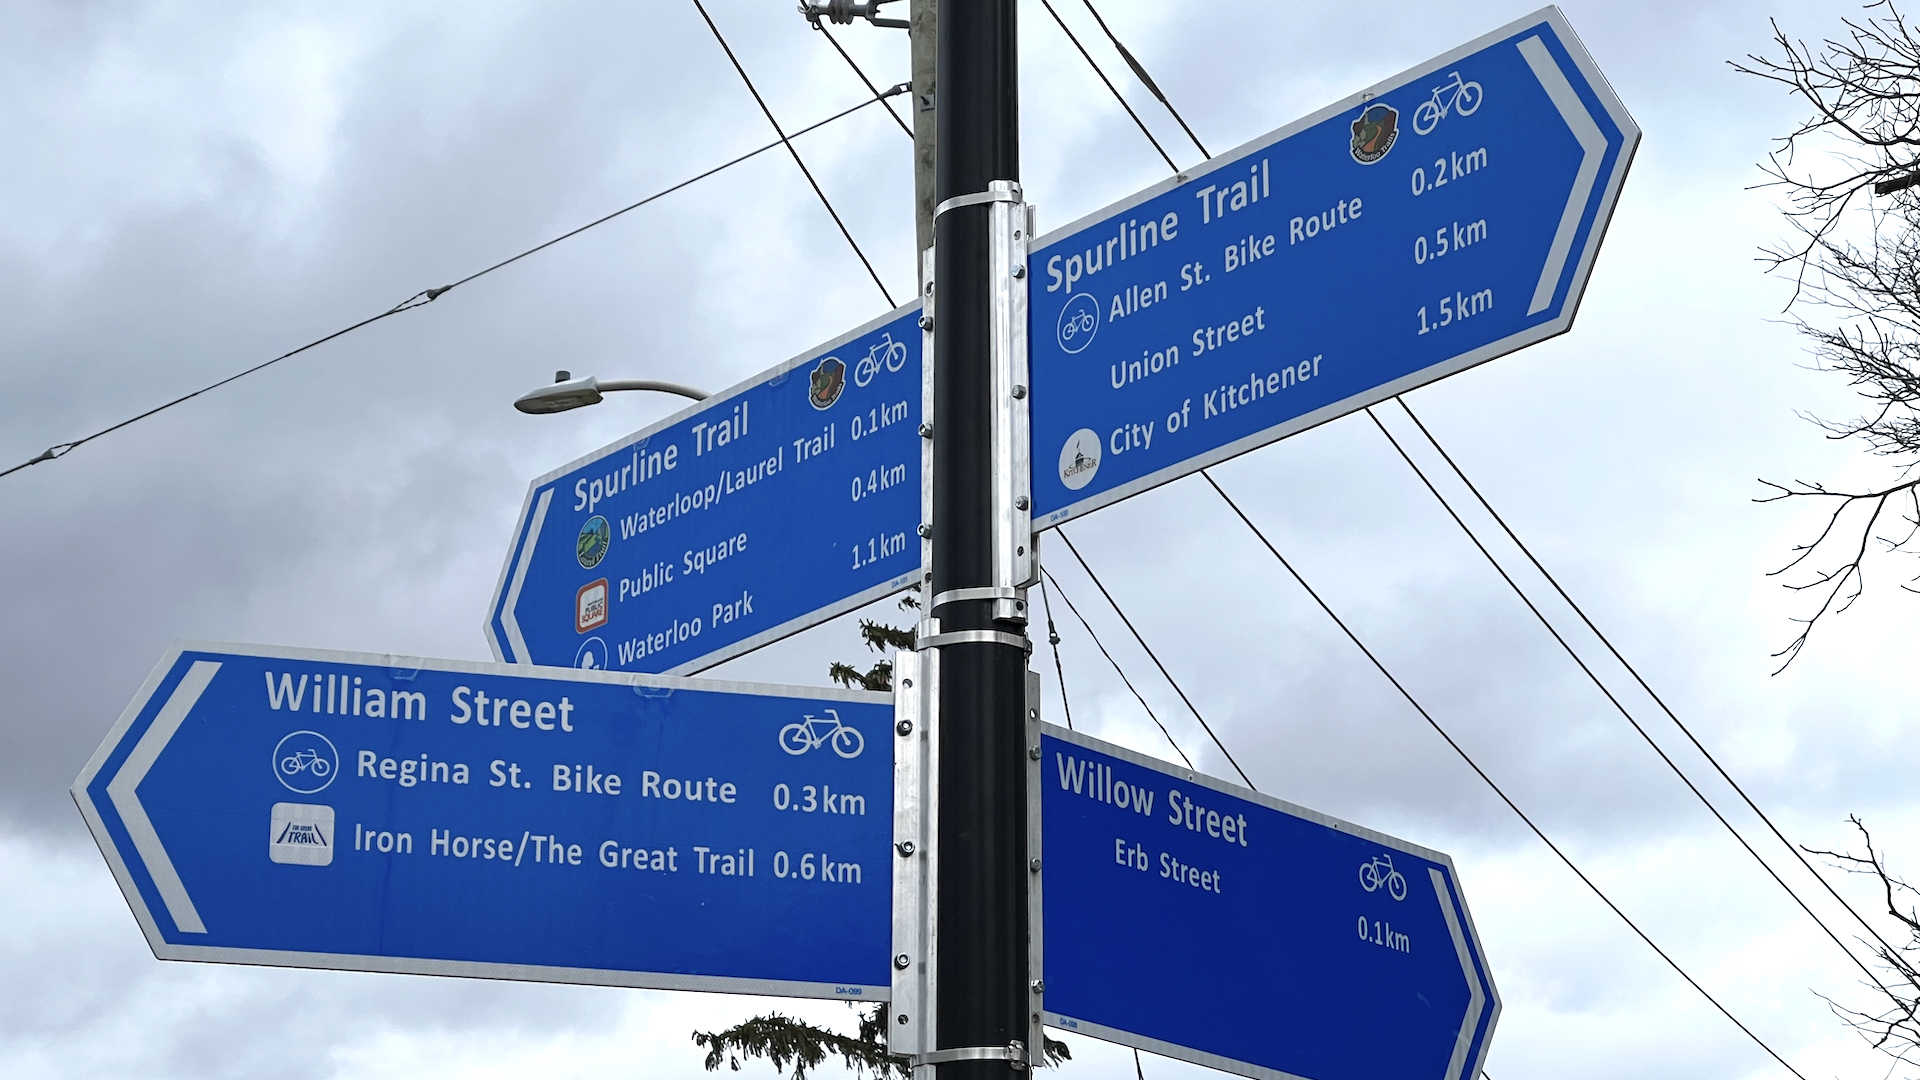 A pole has four blue wayfinding signs, each pointing in a different direction. Each sign indicates what can be found by traveling along the trail in that direction.